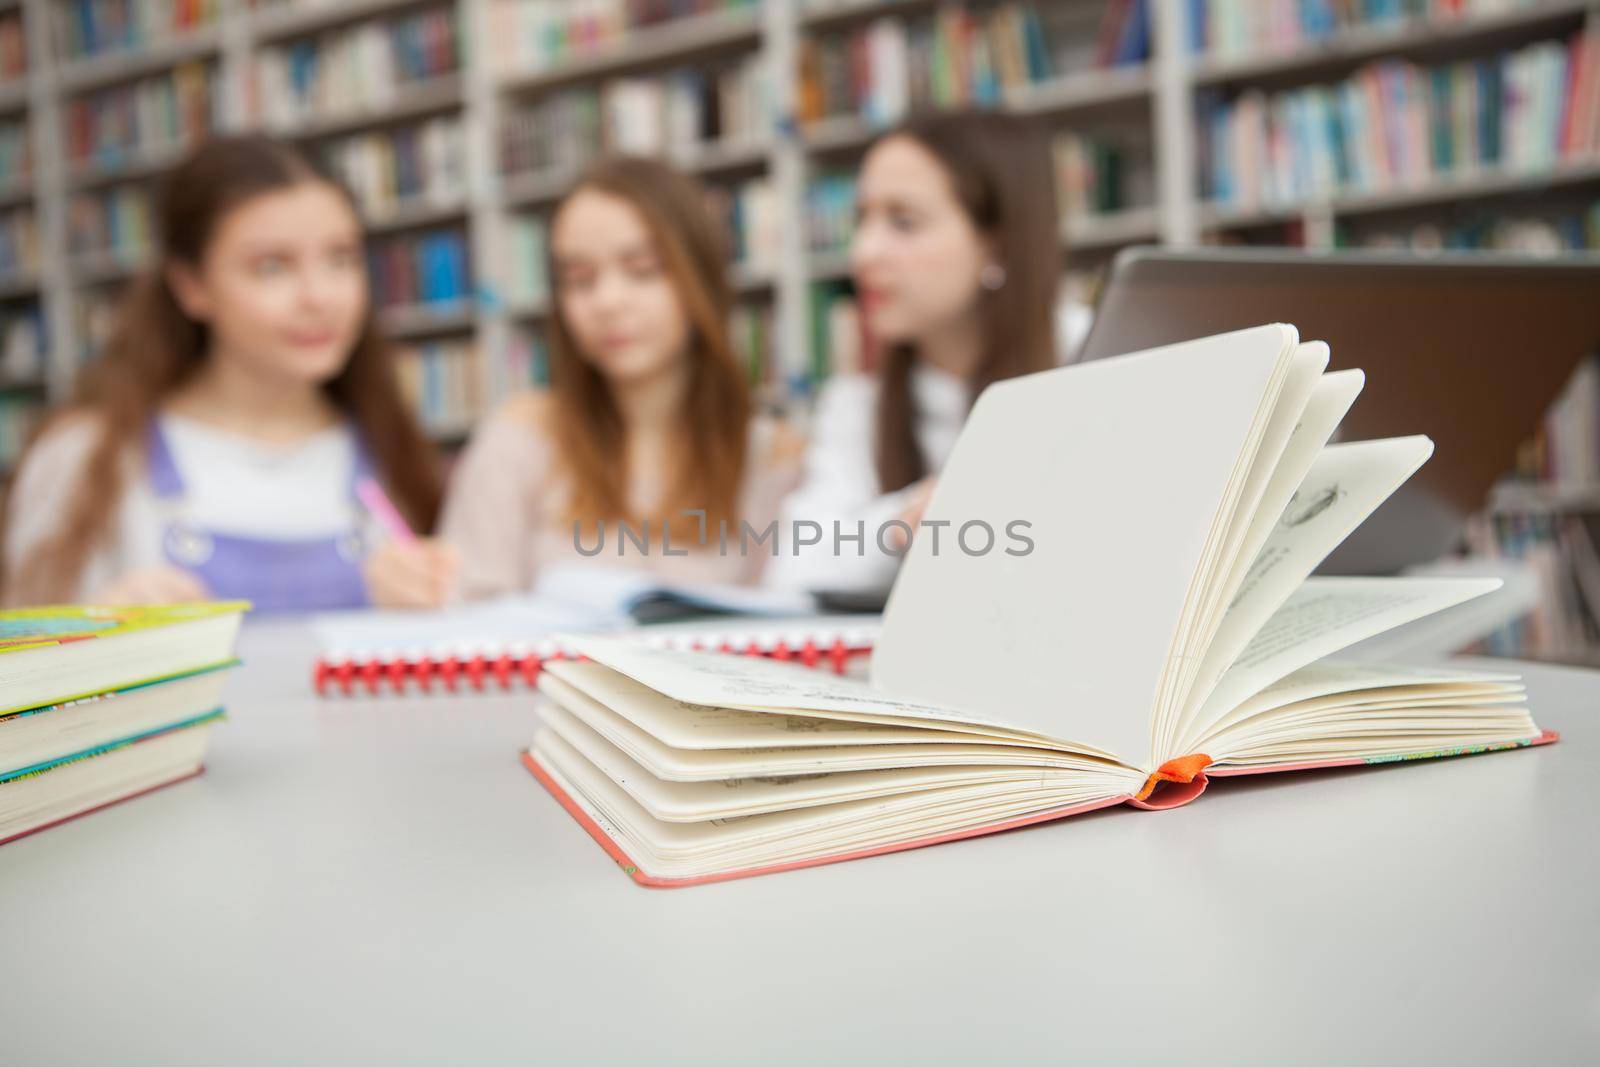 Teenage girls studying together at the library by MAD_Production